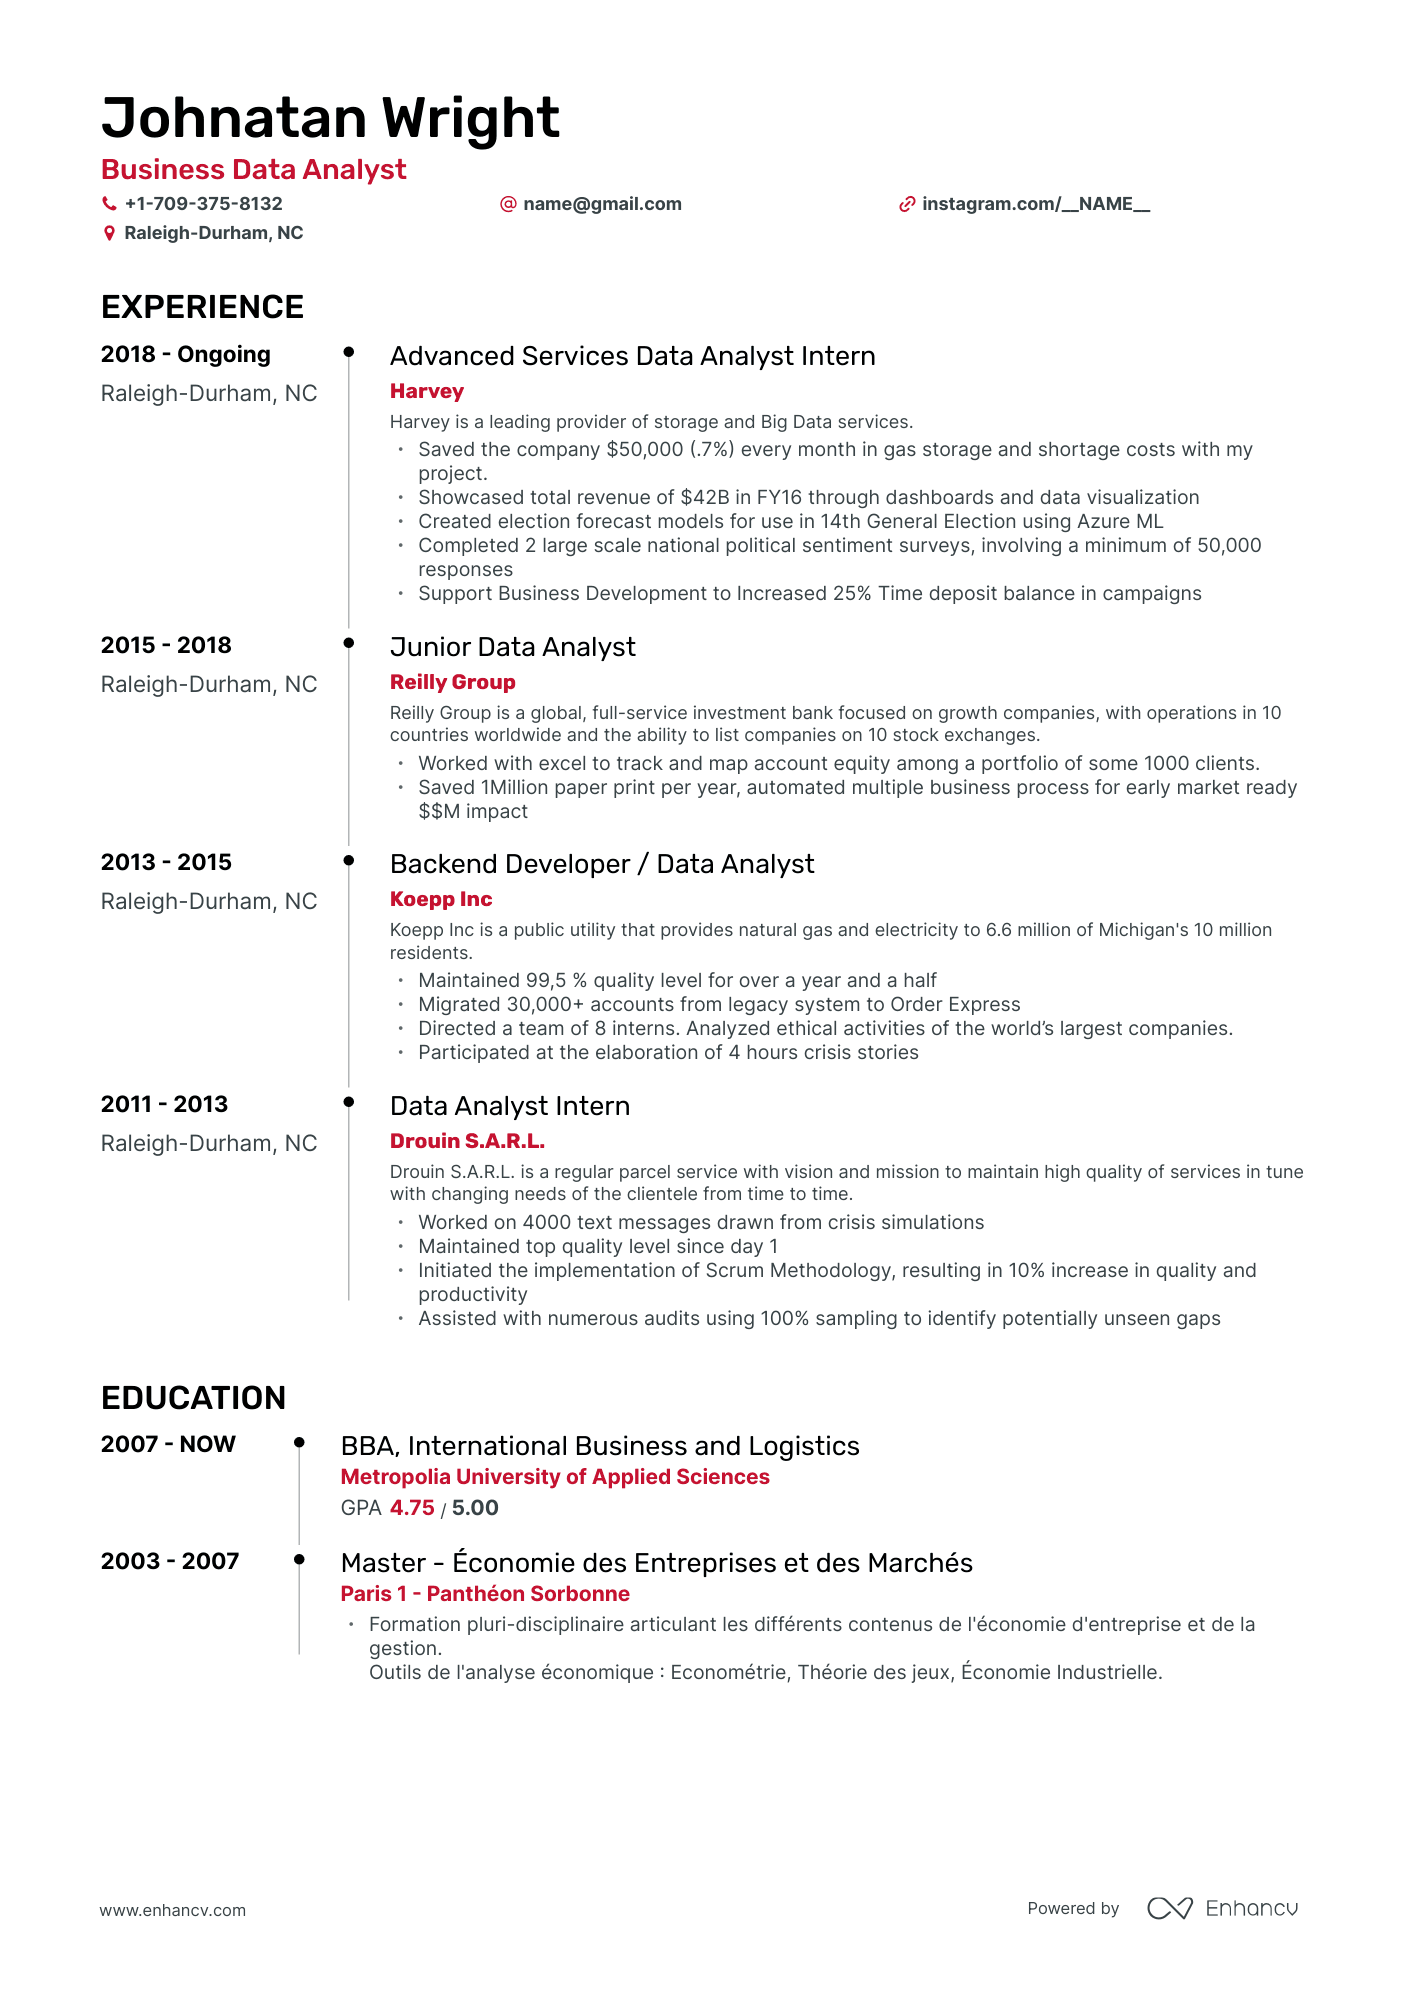 Timeline Business Data Analyst Resume Template